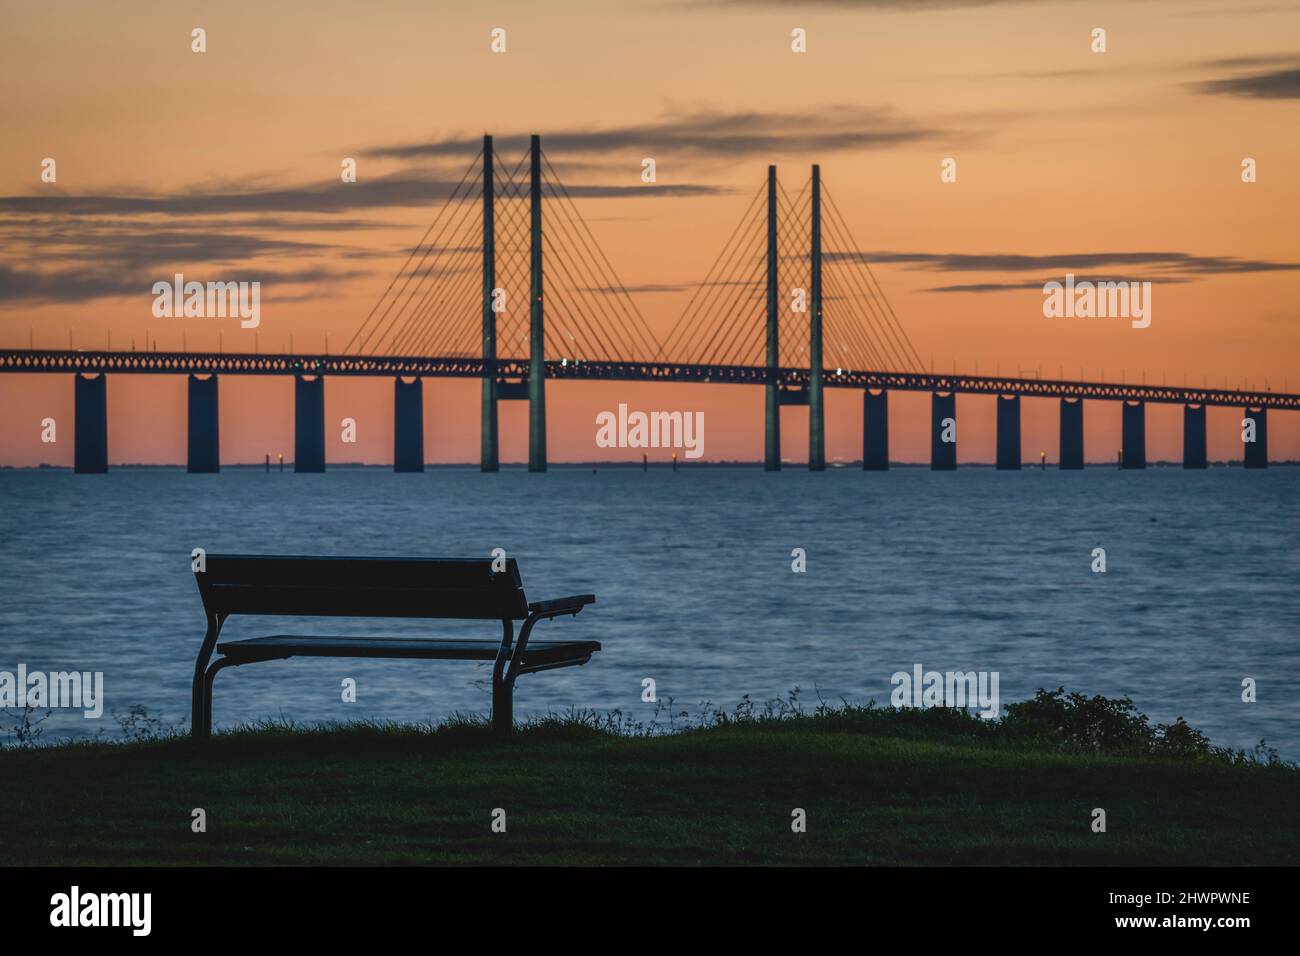 Sweden, Skane County, Malmo, Oresund Bridge at dusk with empty park bench in foreground Stock Photo